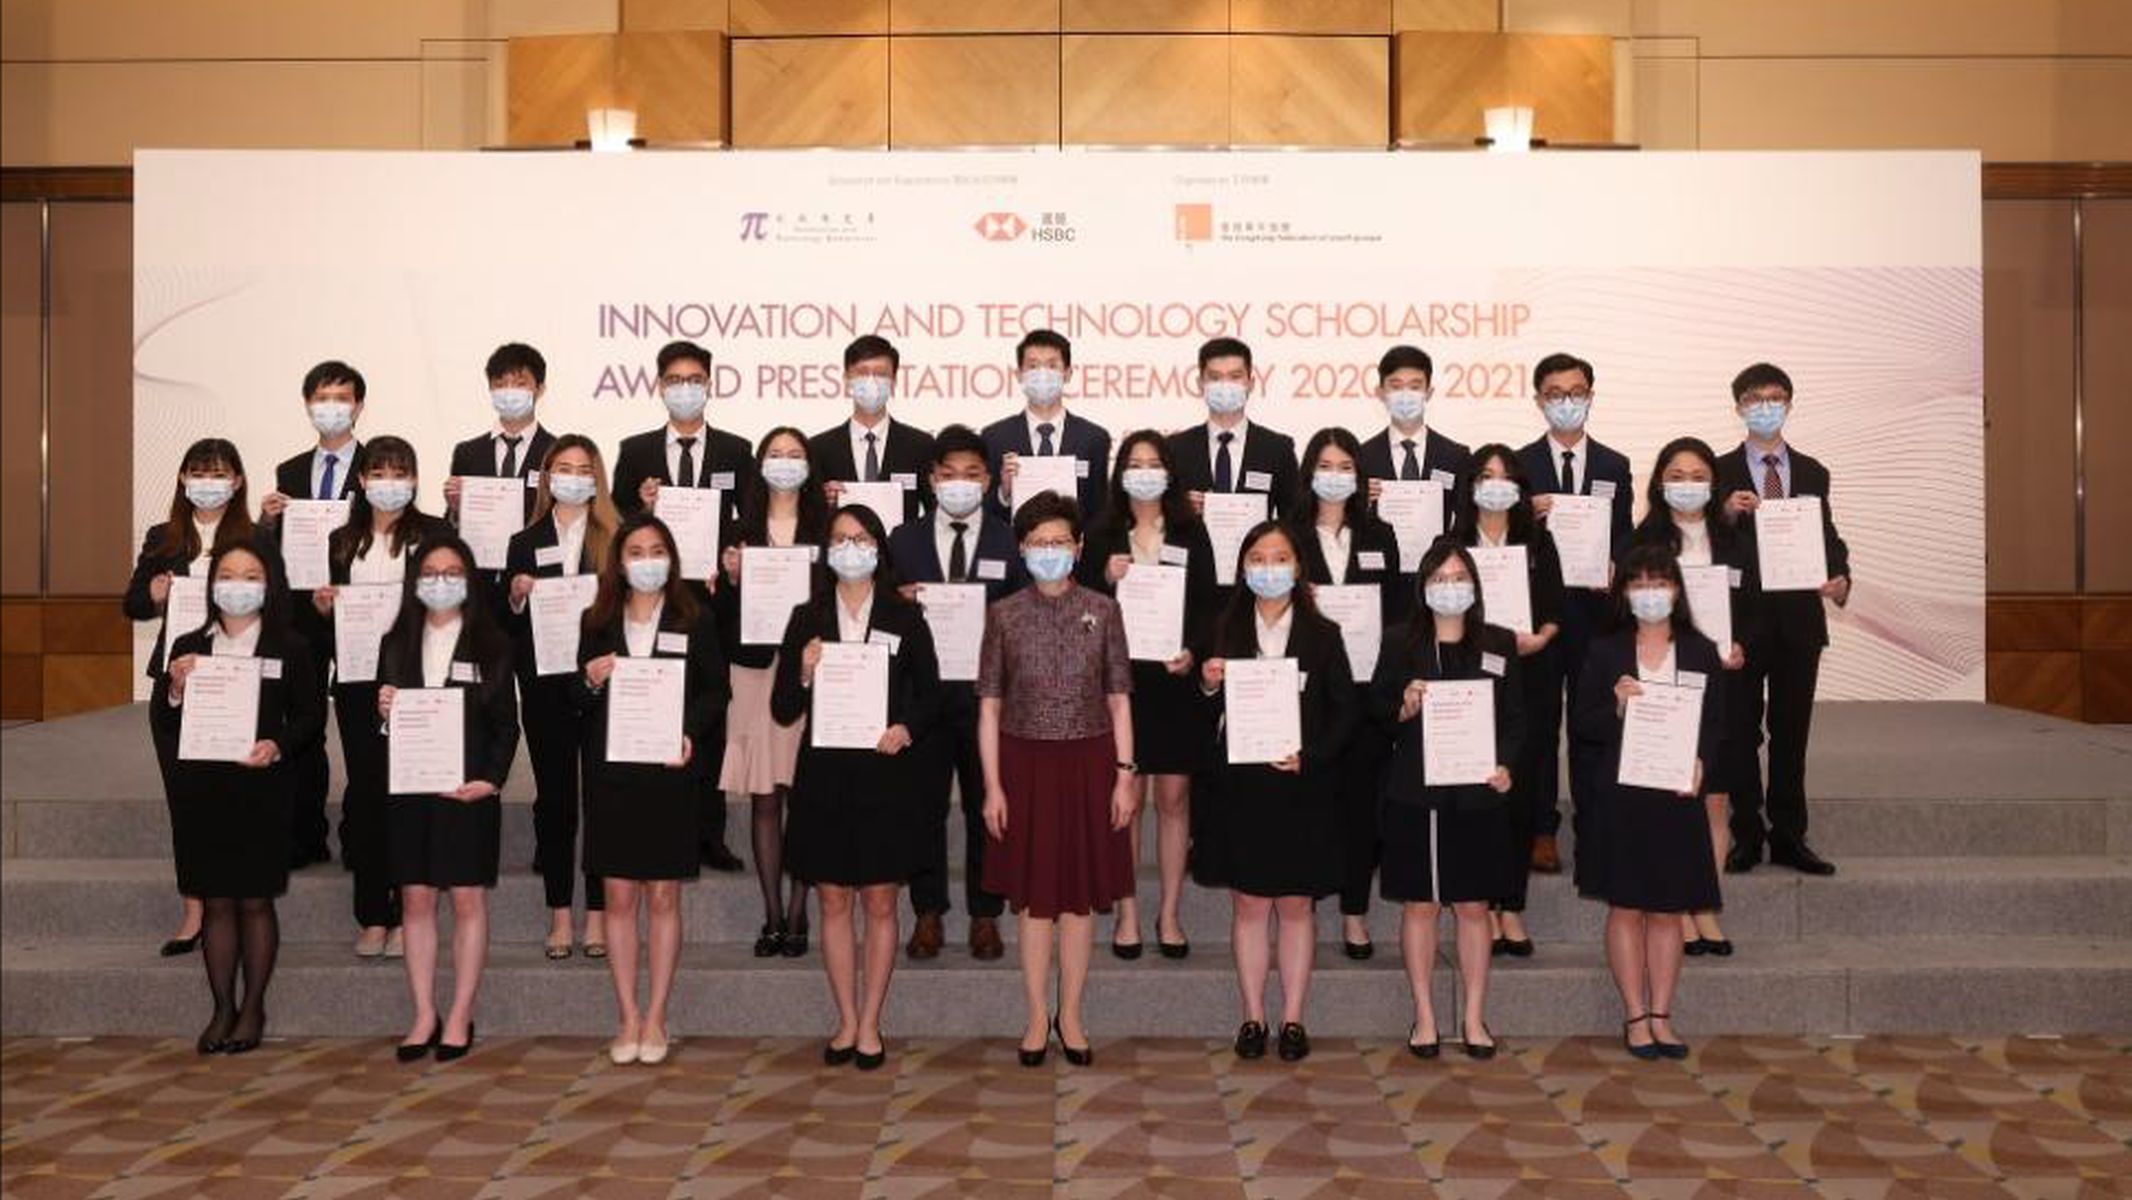 Mrs Carrie Lam, Chief Executive of HKSAR (fourth from right), presents certificates to the awardees of the Innovation and Technology Scholarship 2021.